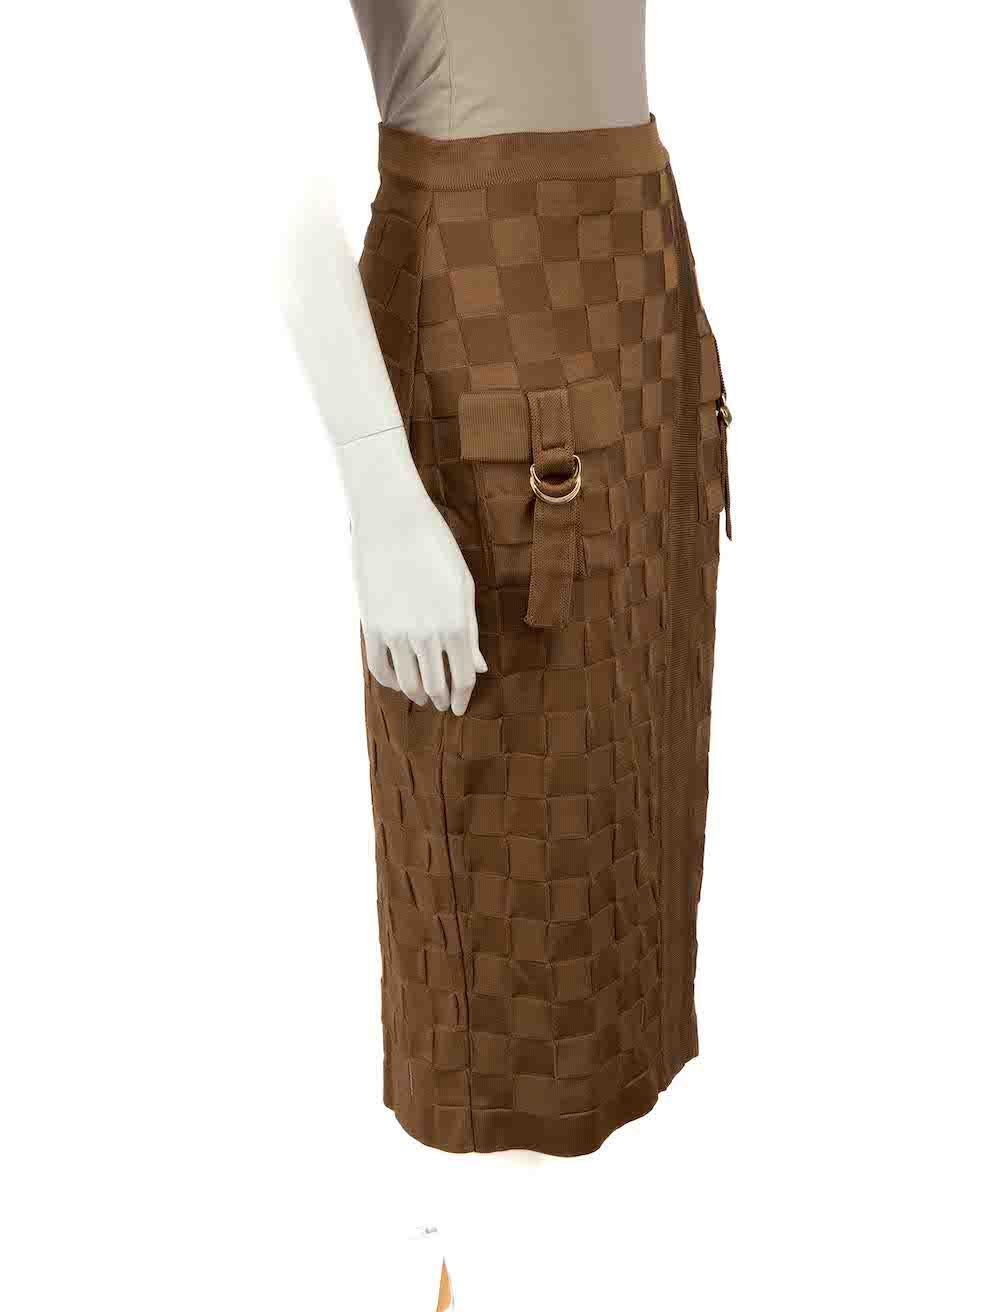 CONDITION is Very good. Hardly any visible wear to skirt is evident on this used Balmain designer resale item.
 
 
 
 Details
 
 
 Brown
 
 Viscose
 
 Pencil skirt
 
 Woven pattern
 
 2x Front pockets
 
 Midi
 
 Back zip fastening
 
 
 
 
 
 Made in